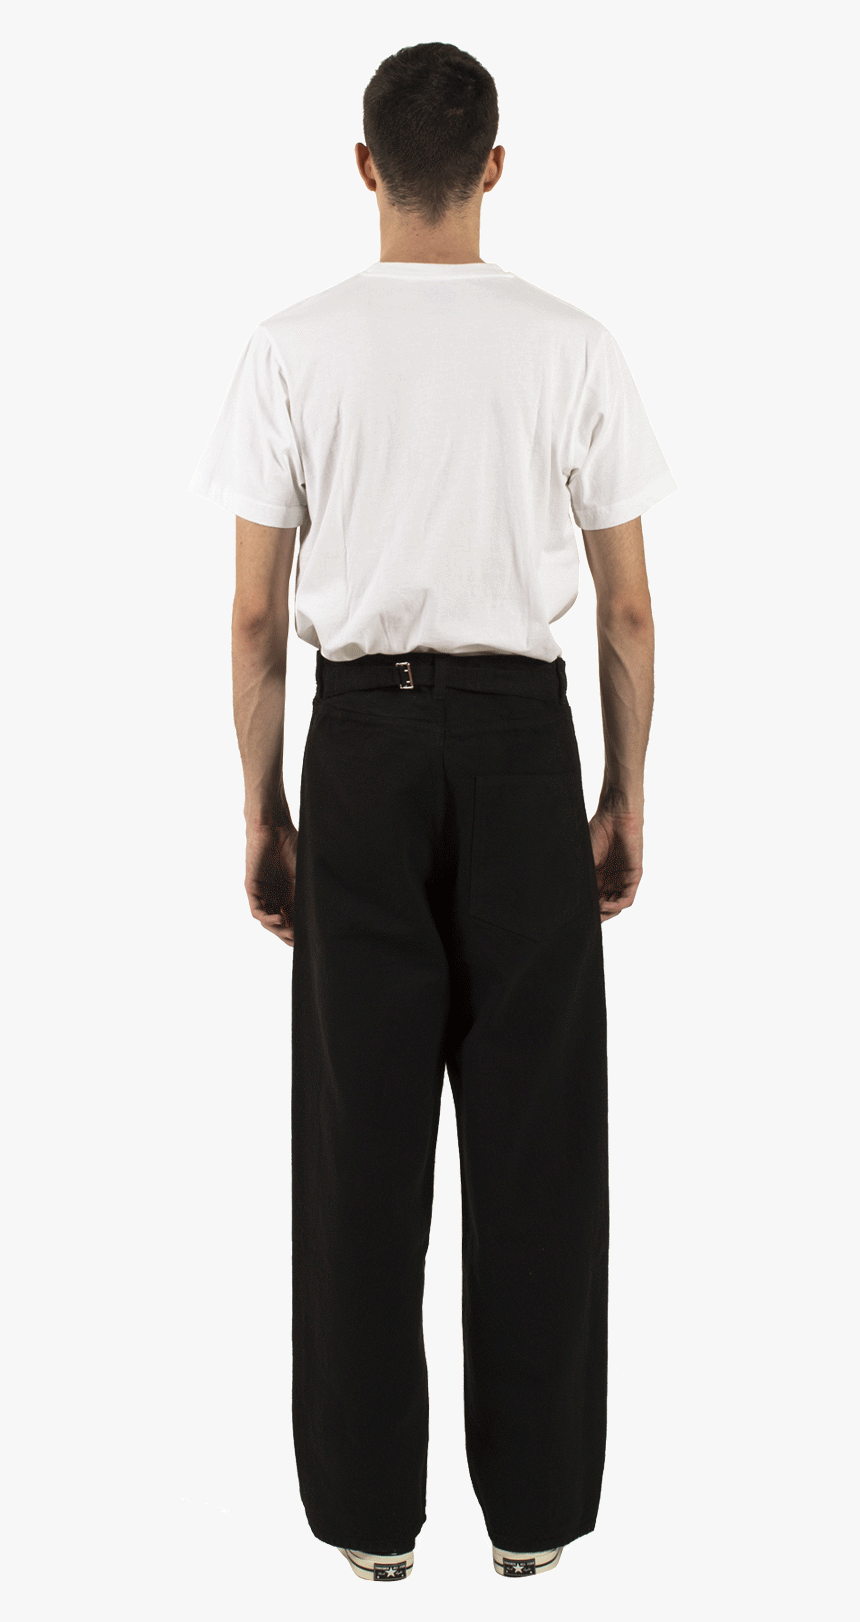 Scarecrow Trousers Black - Pocket, HD Png Download, Free Download